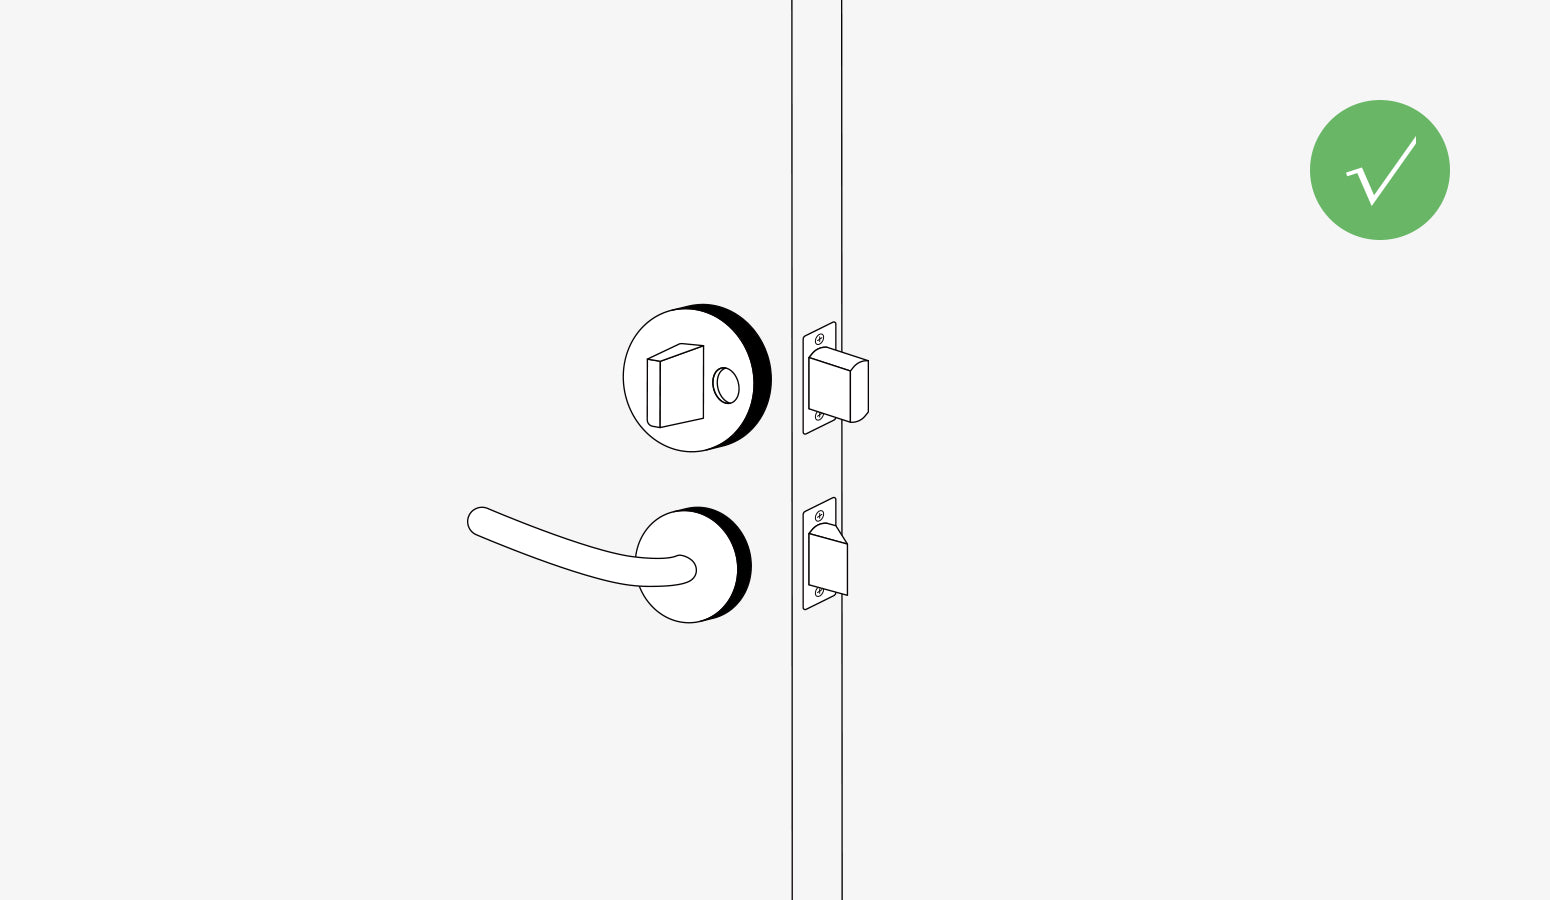 The Holo is currently compatible with Single Cylinder Deadbolts only, as shown in the illustration.